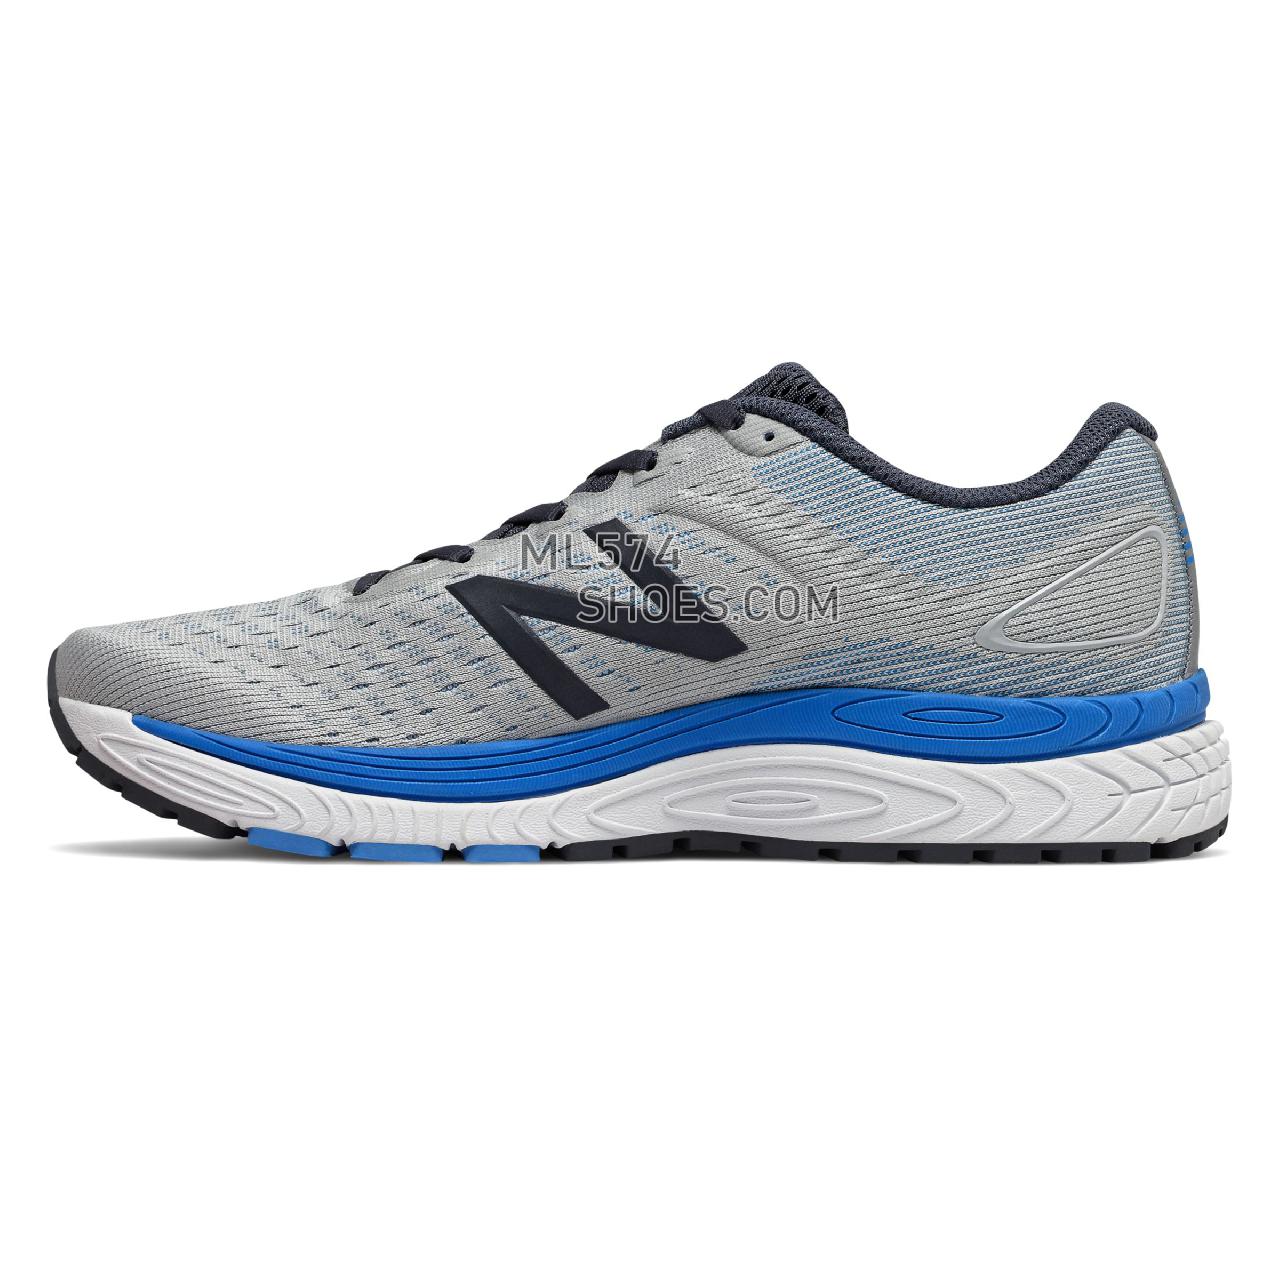 New Balance Solvi v2 - Men's Classic Sneakers - Light Aluminum with Thunder and Vision Blue - MSOLVCL2